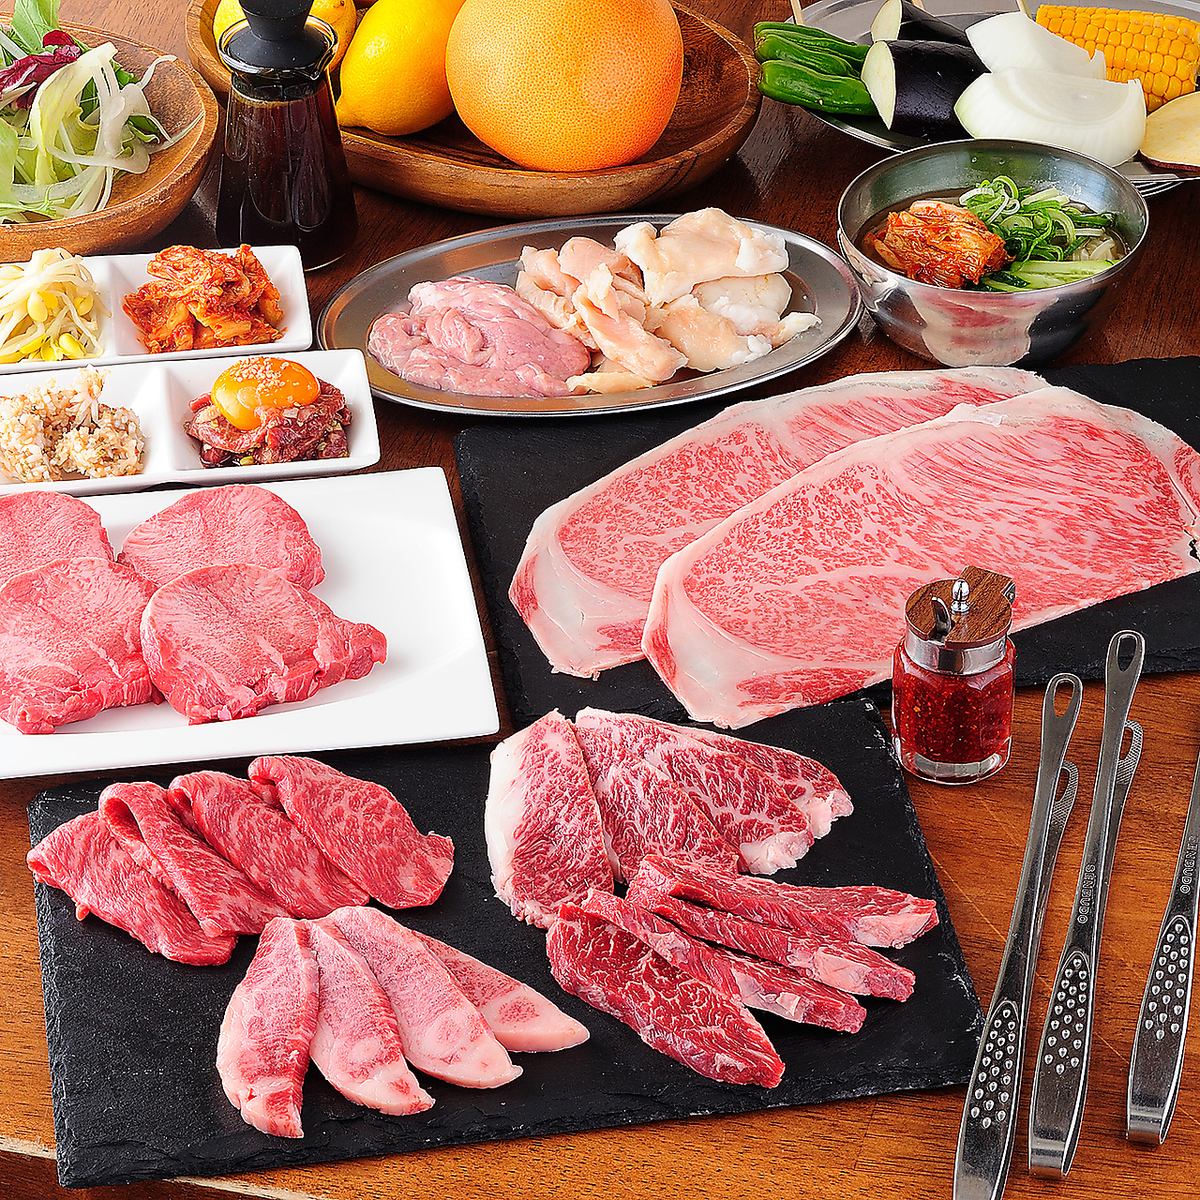 Enjoy authentic charcoal-grilled fresh meat from a butcher shop ♪ Now accepting banquets!